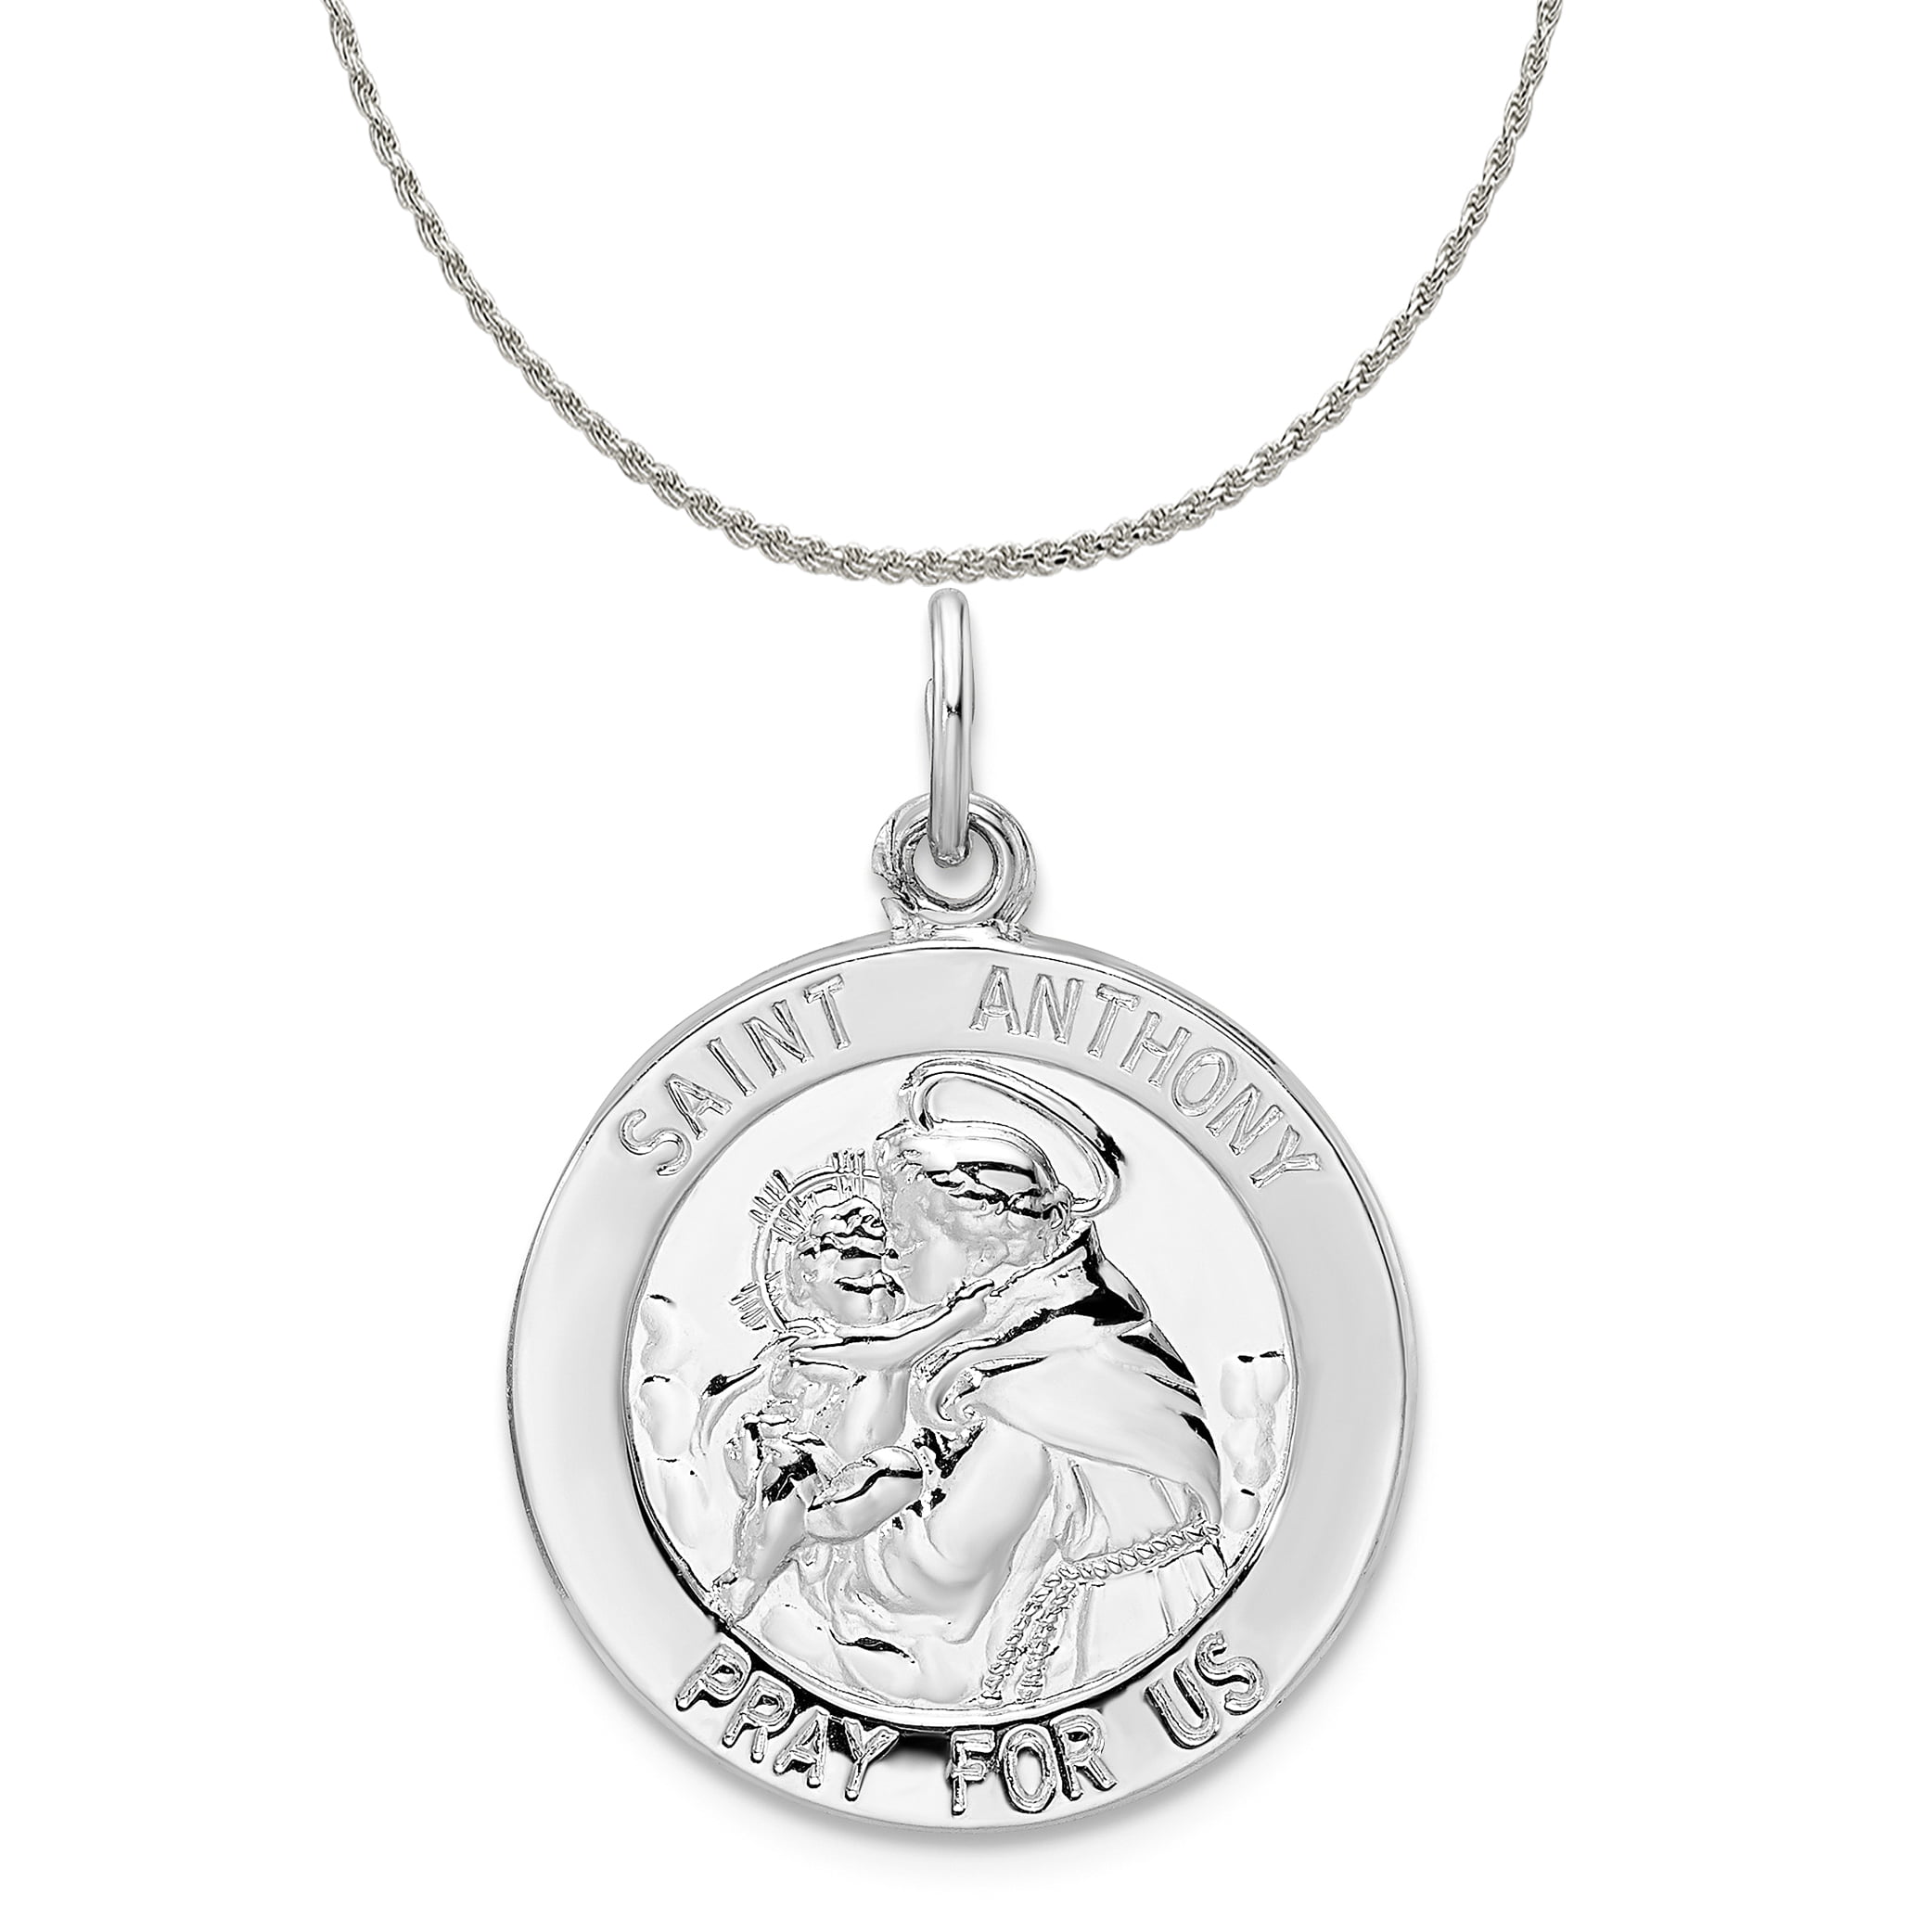 Bonyak Jewelry 18 Inch Rhodium Plated Necklace w/ 4mm Sterling Silver Beads and Saint Scholastica Charm